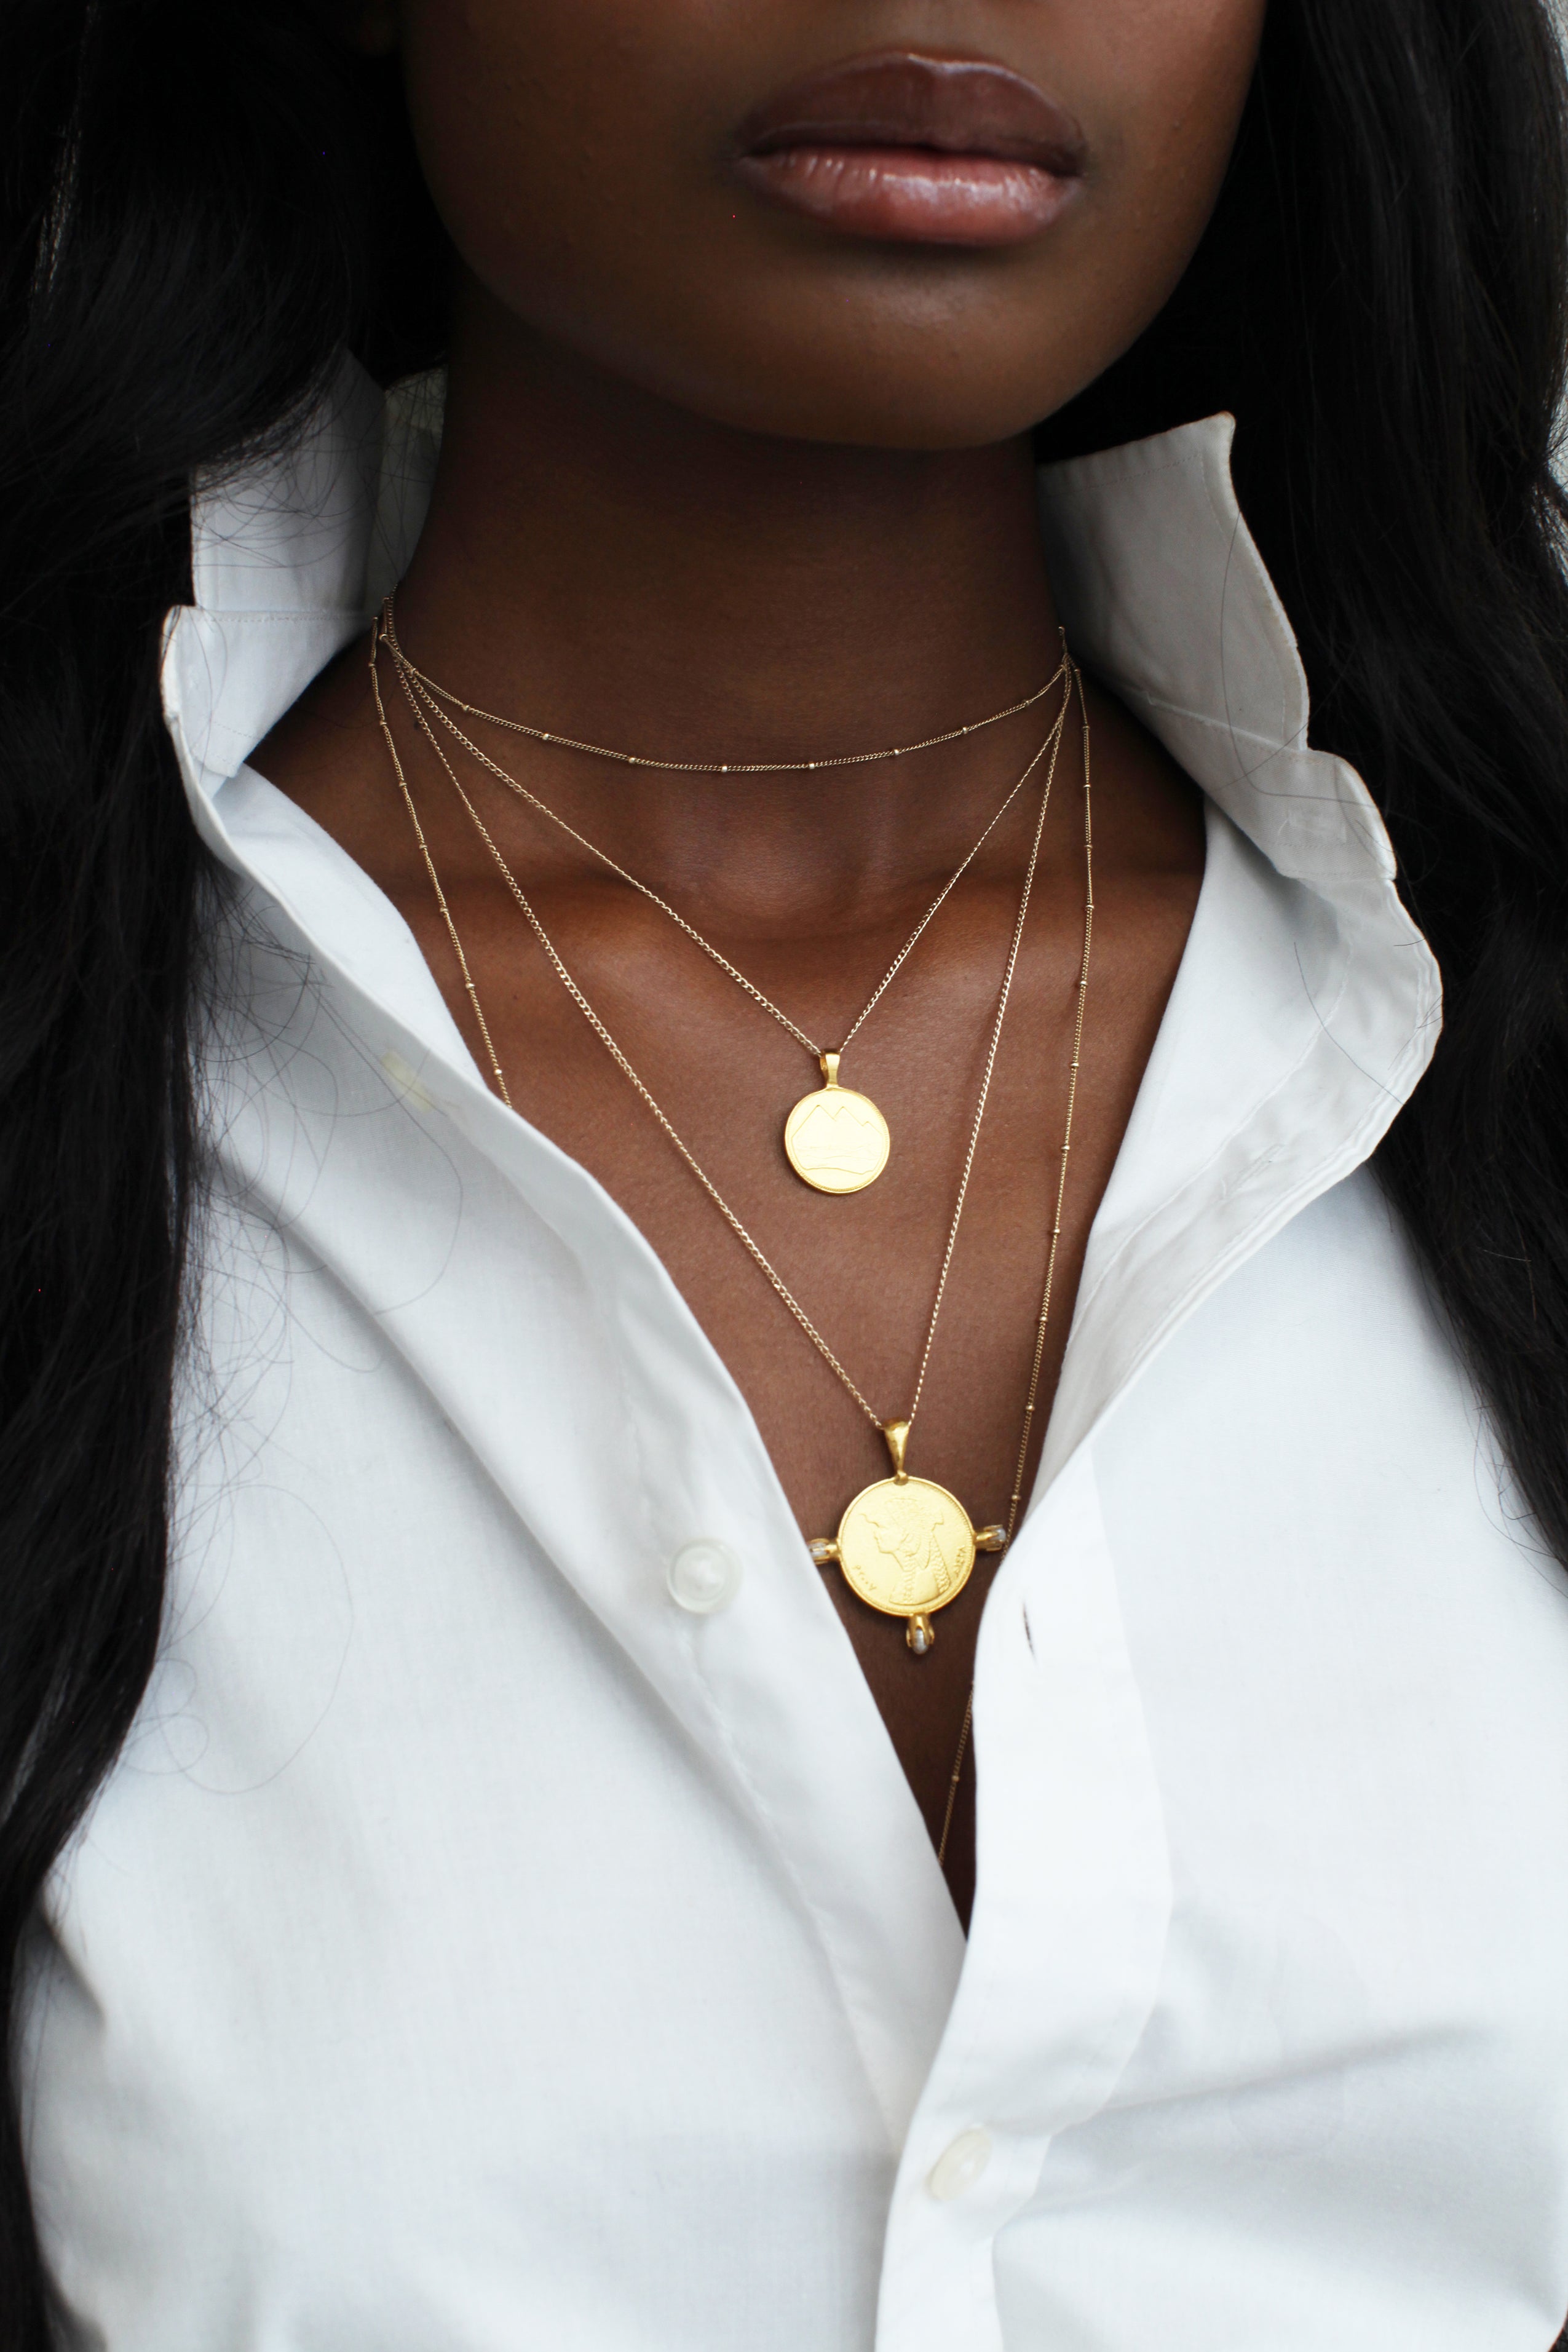 THE CLEOPATRA Coin Pendant with Pearls